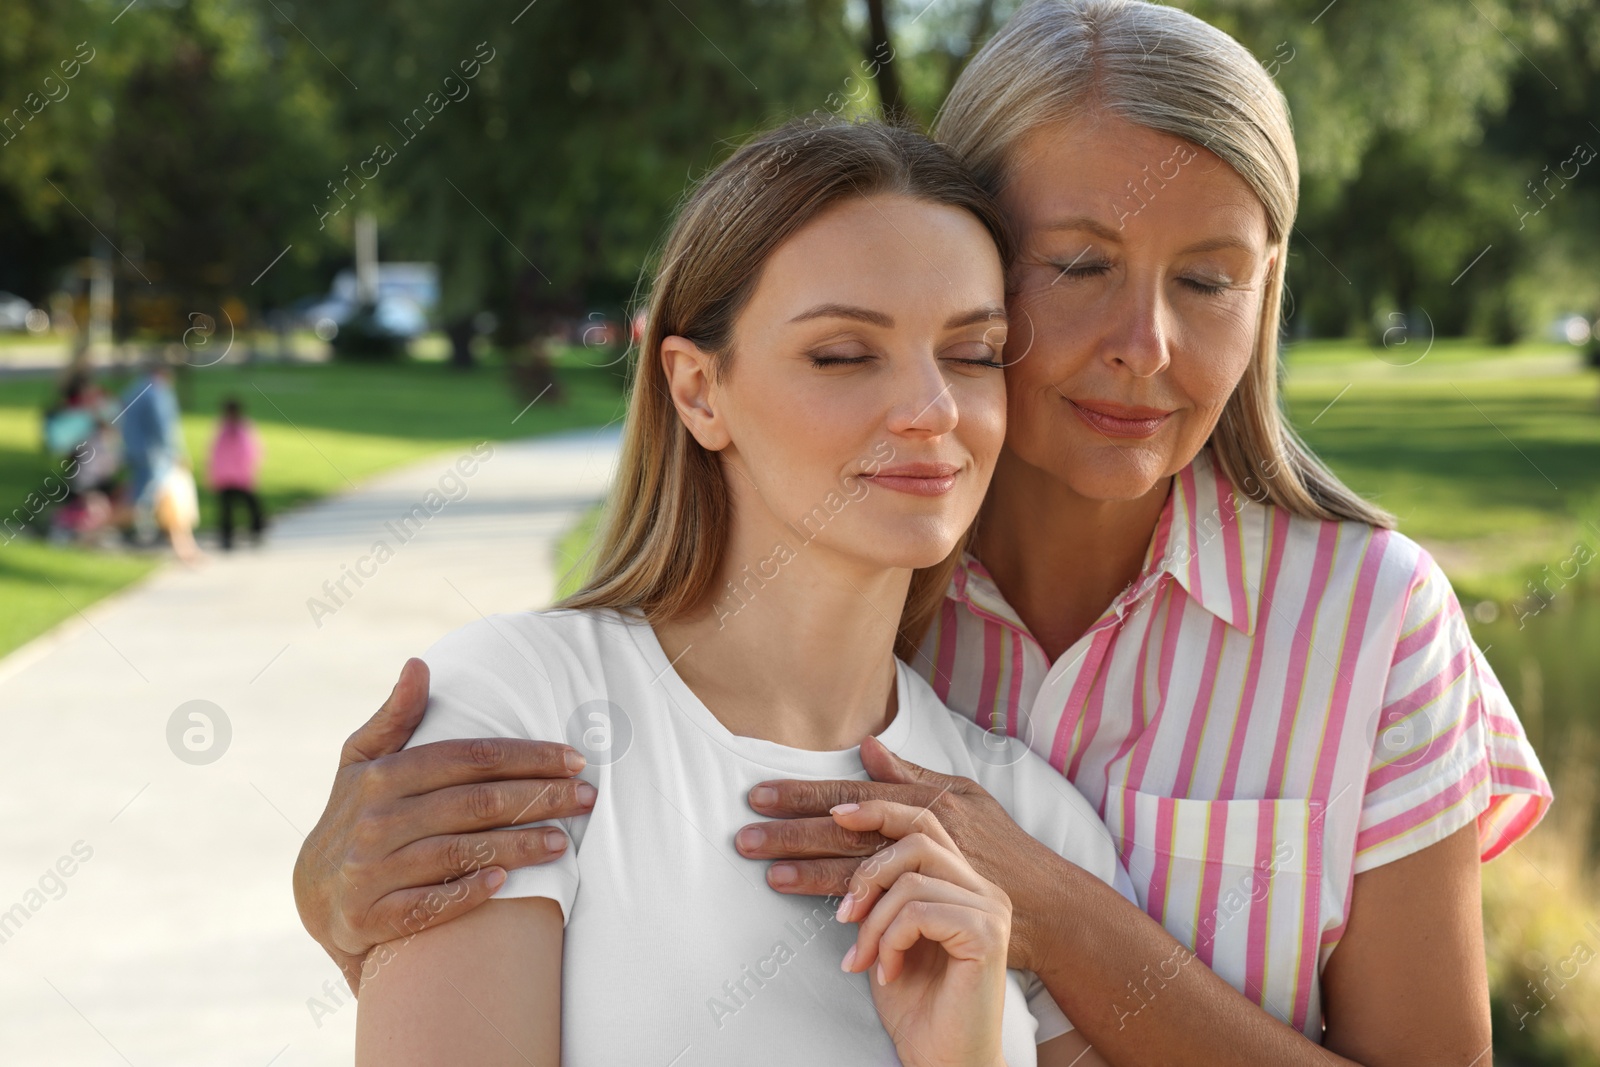 Photo of Family portrait of happy mother and daughter in park